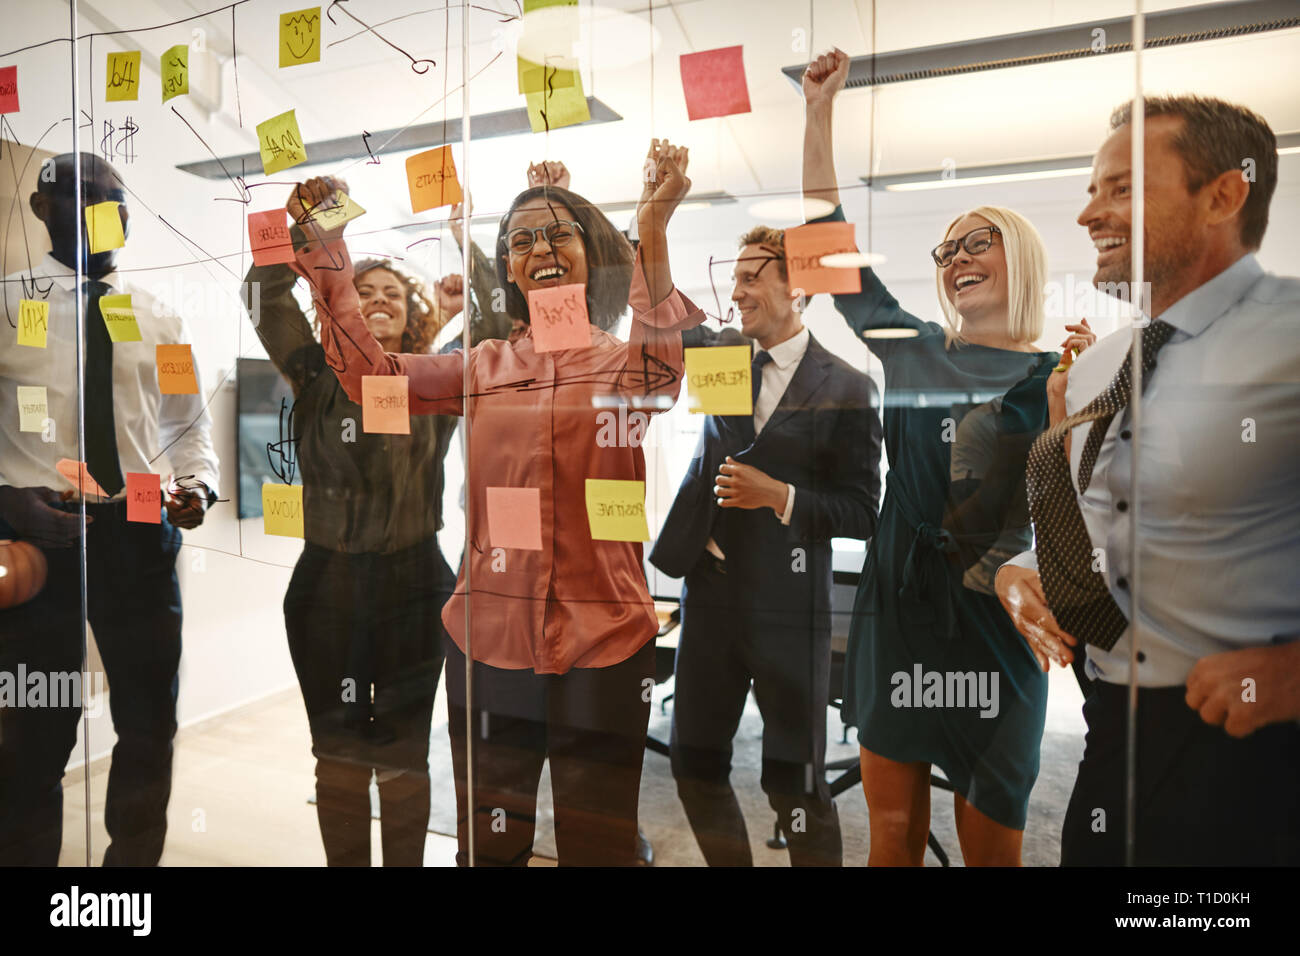 Cheering group of excited businesspeople jumping up and down while celebrating after a brainstorming session with sticky notes in an office Stock Photo